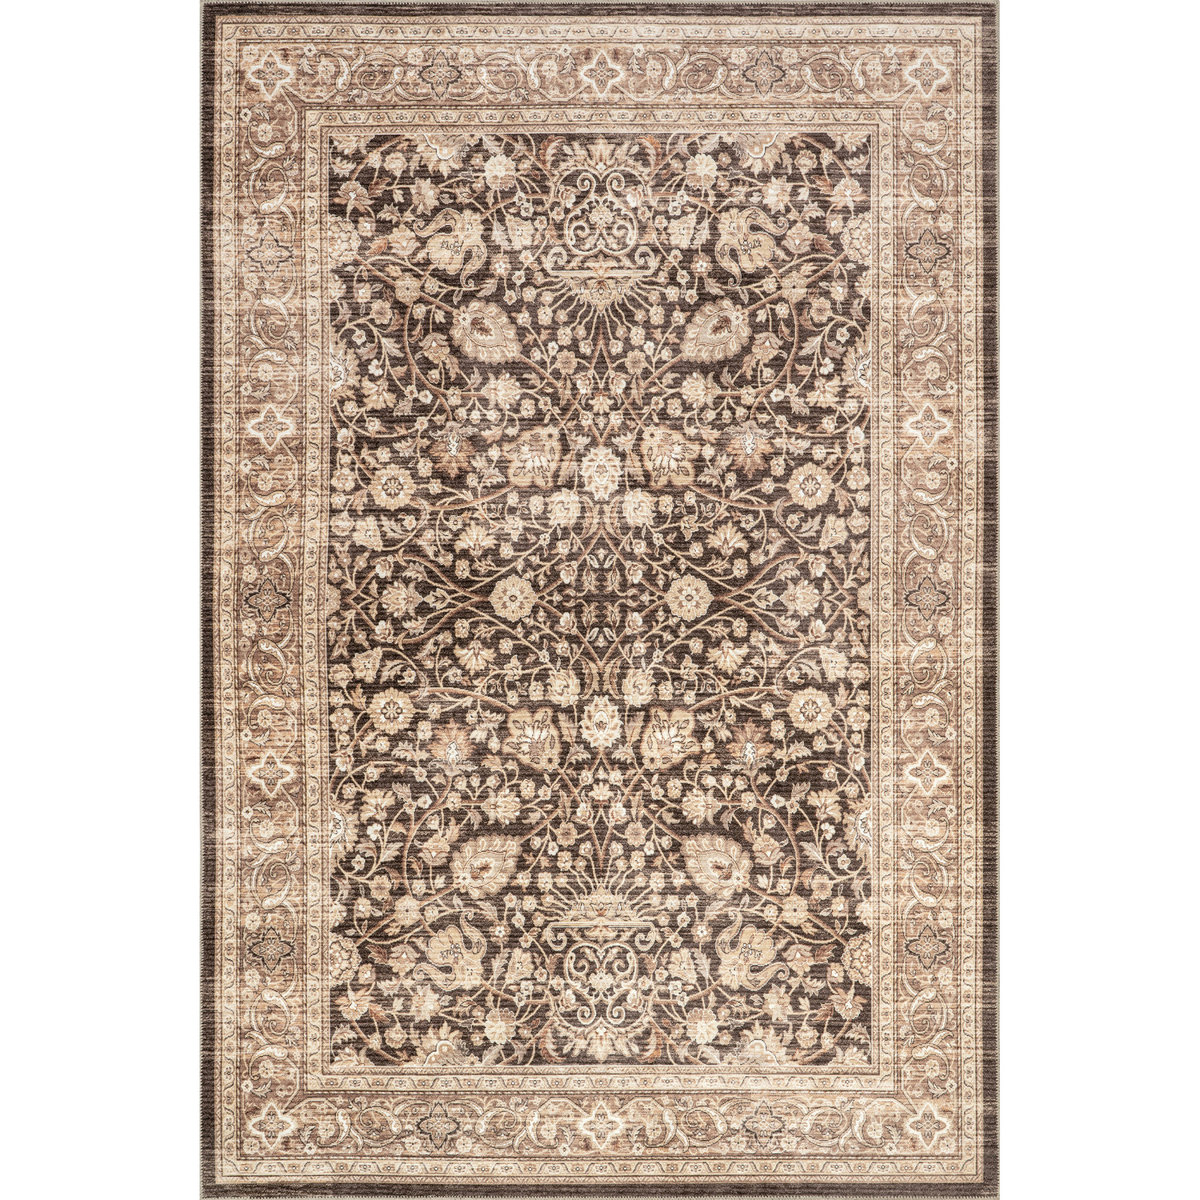 nuLOOM Cerise Floral Faded Spill Proof Washable Area Rug, Dark Brown 8' x 10'